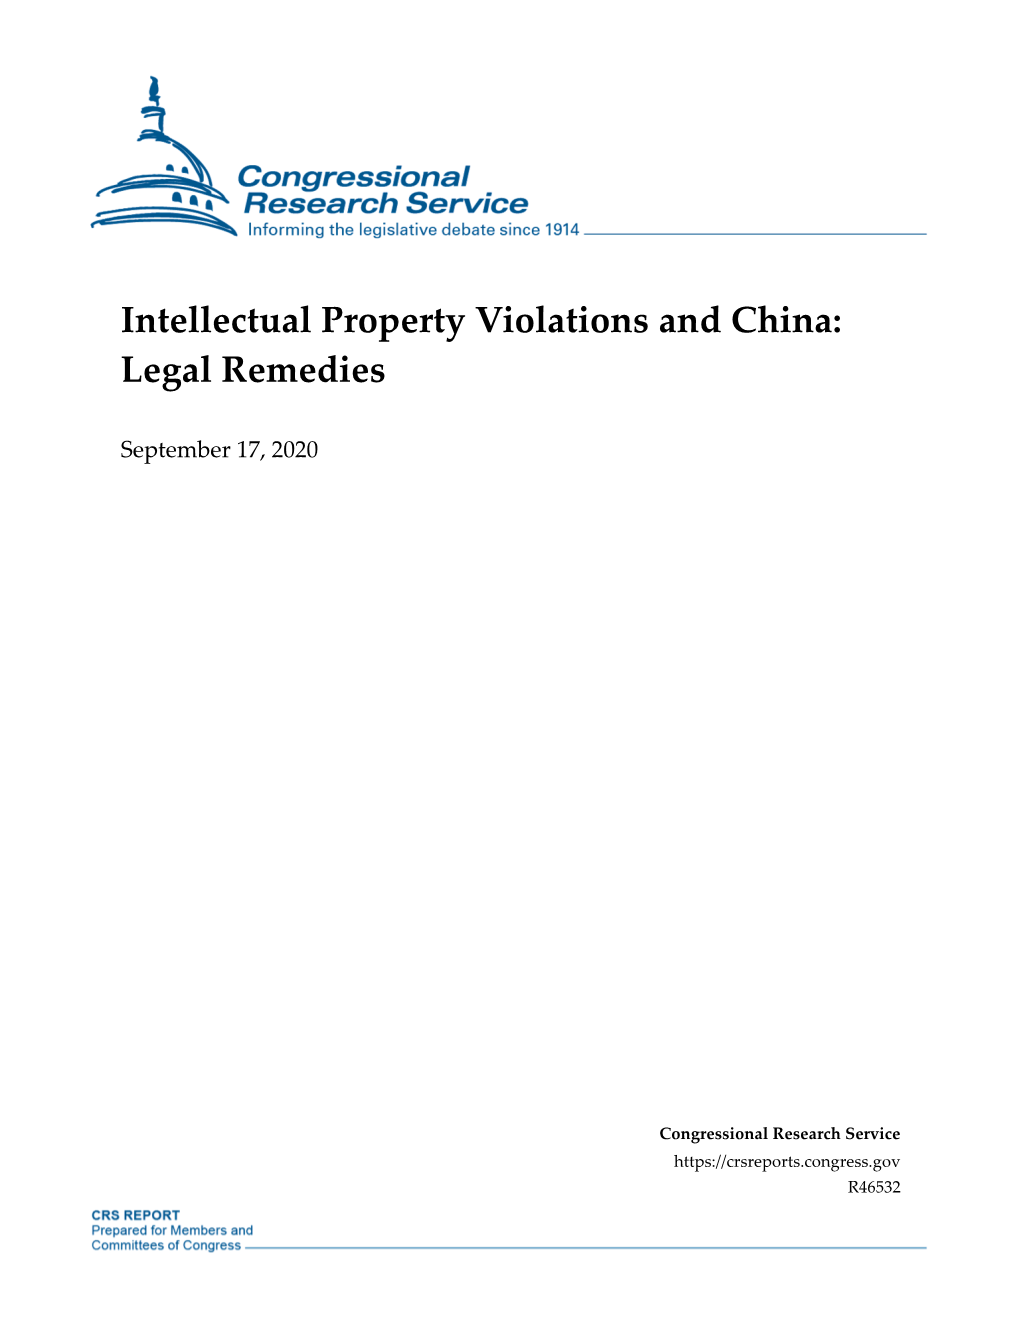 Intellectual Property Violations and China: Legal Remedies